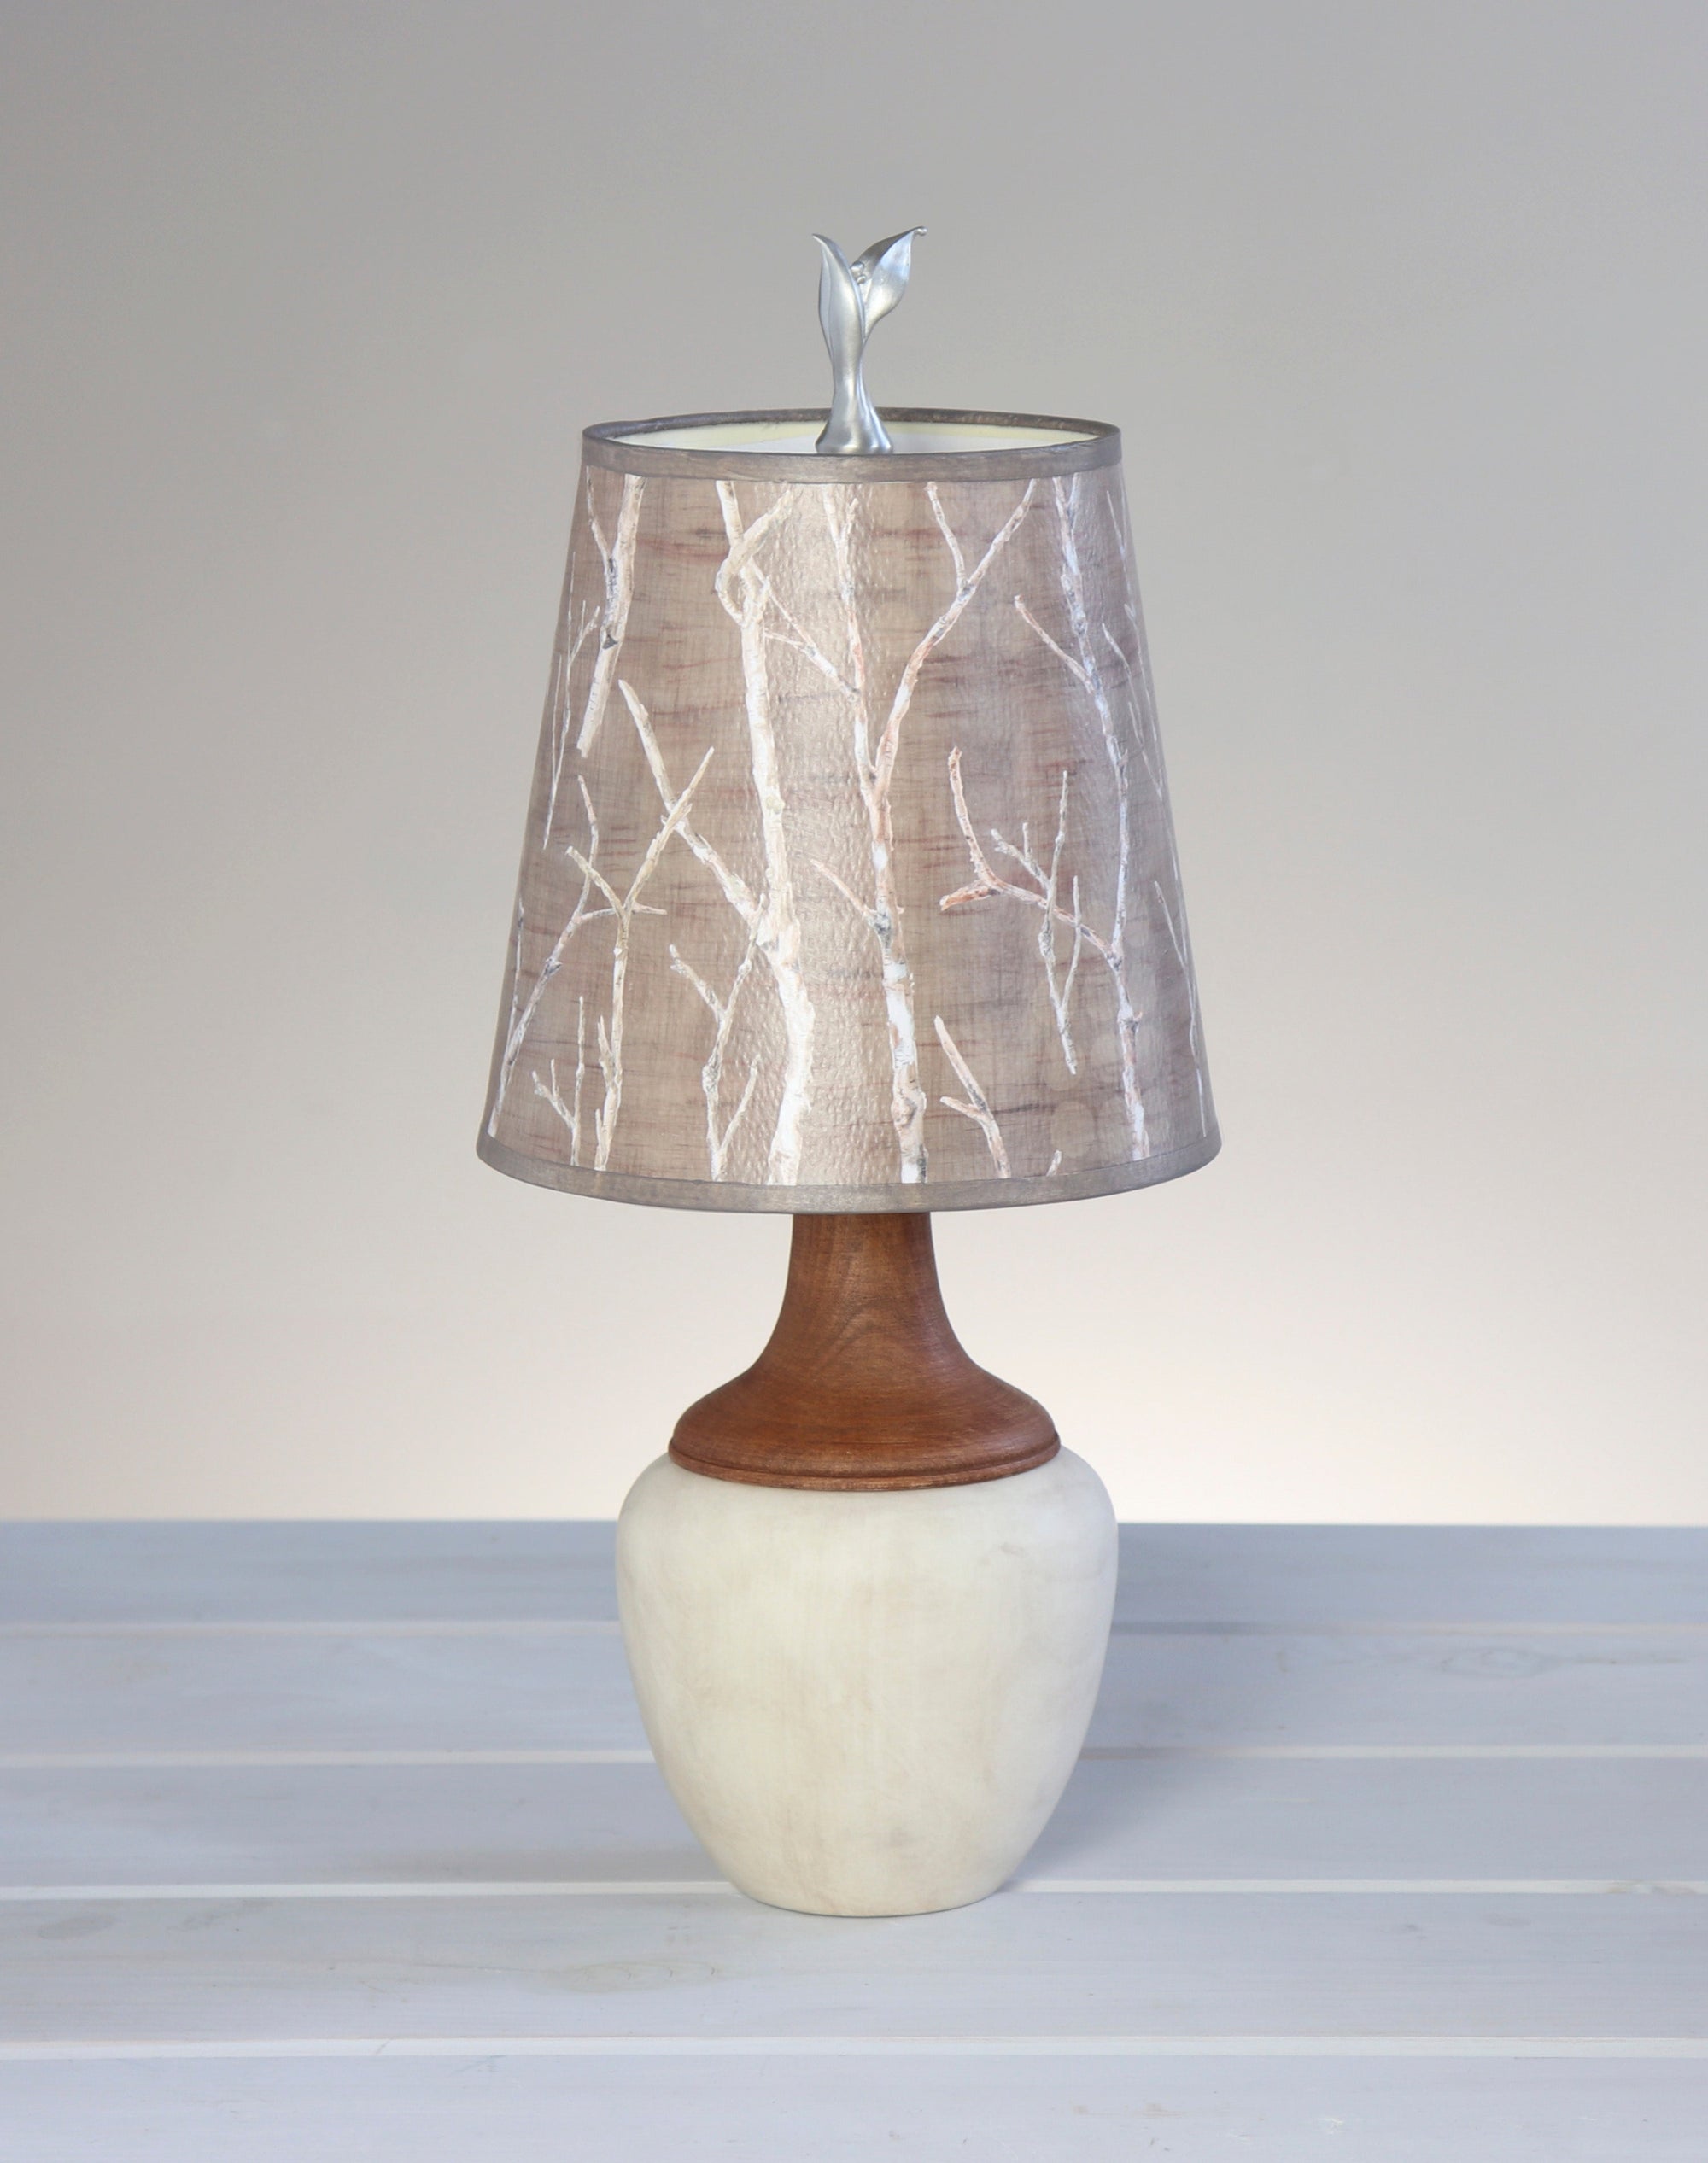 Janna Ugone & Co Table Lamps Ceramic and Maple Table Lamp with Small Drum Shade in Twigs